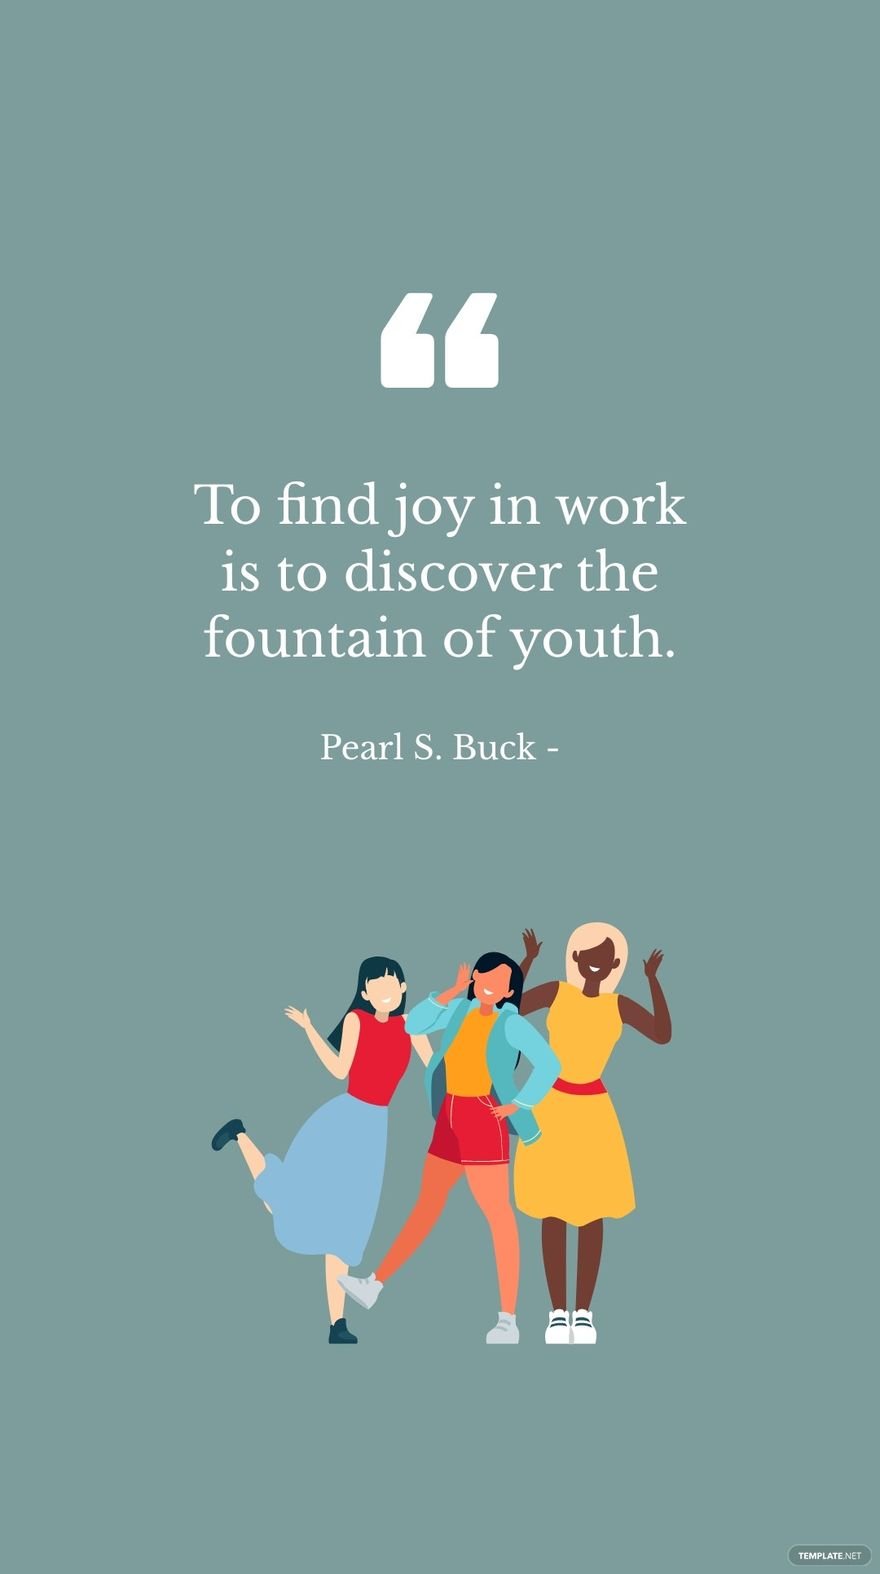 Free Pearl S. Buck - To find joy in work is to discover the fountain of youth. in JPG